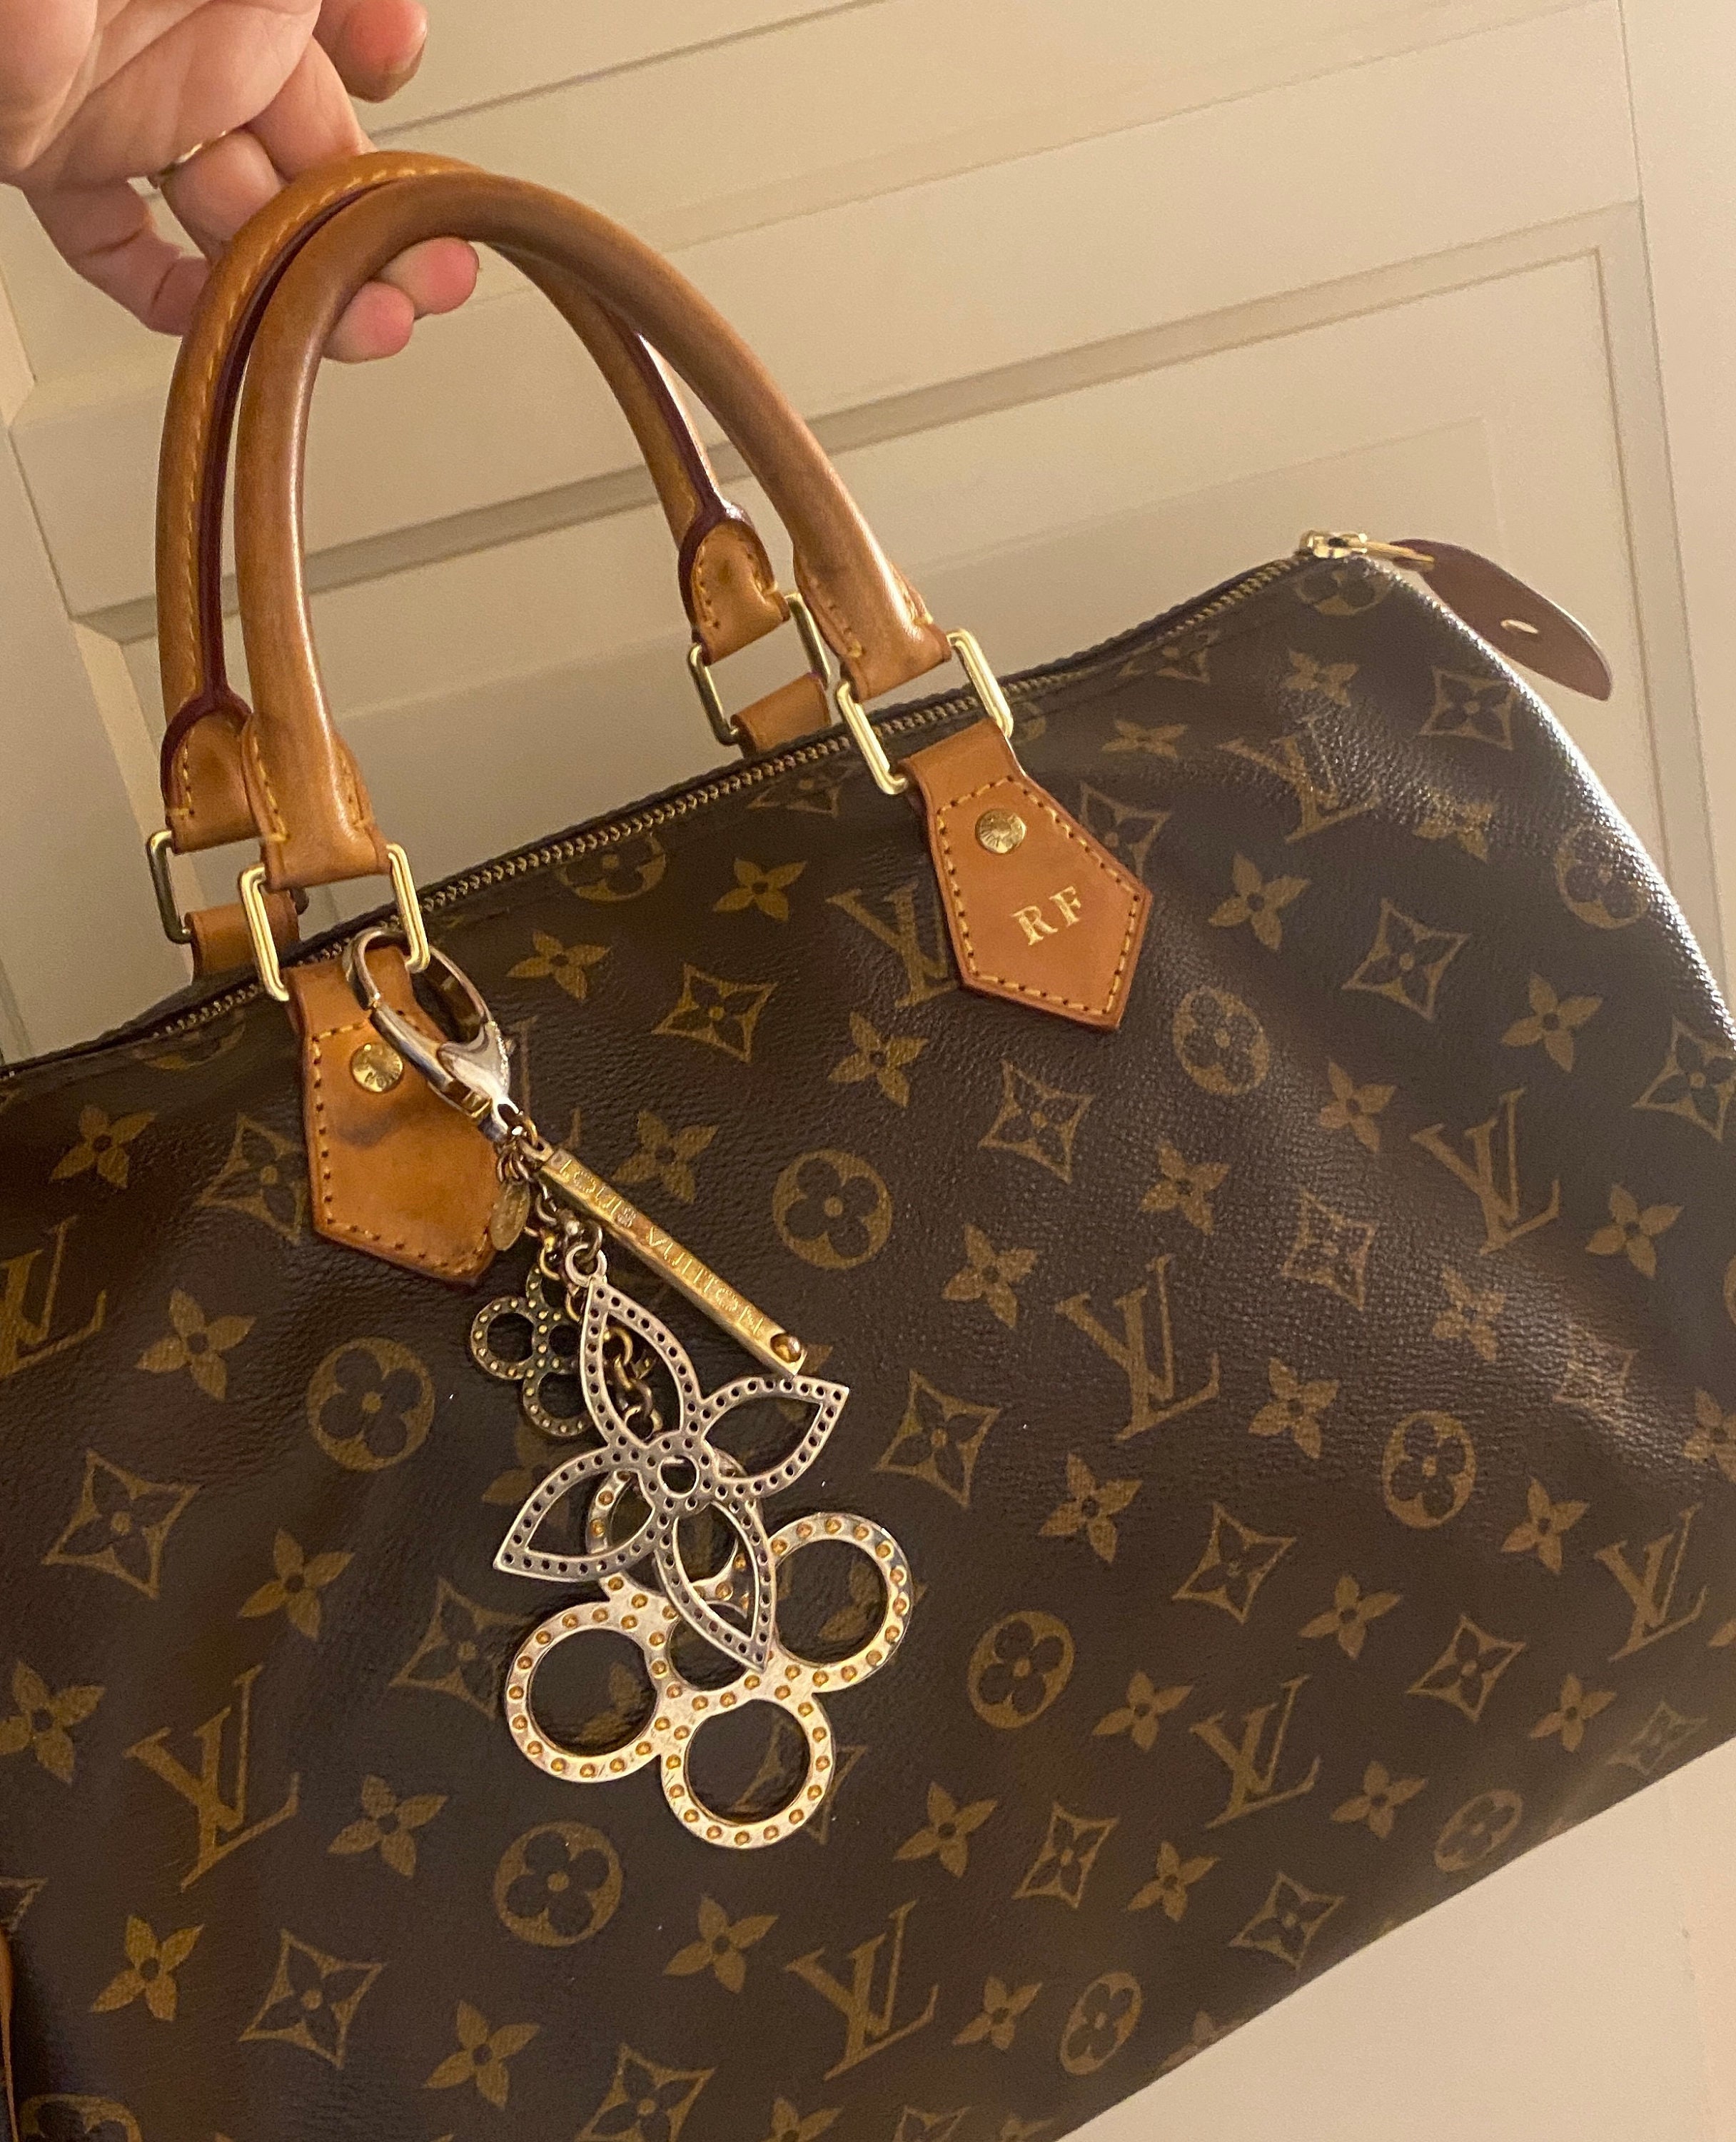 Bag charm Louis Vuitton Gold in Steel - 31754398